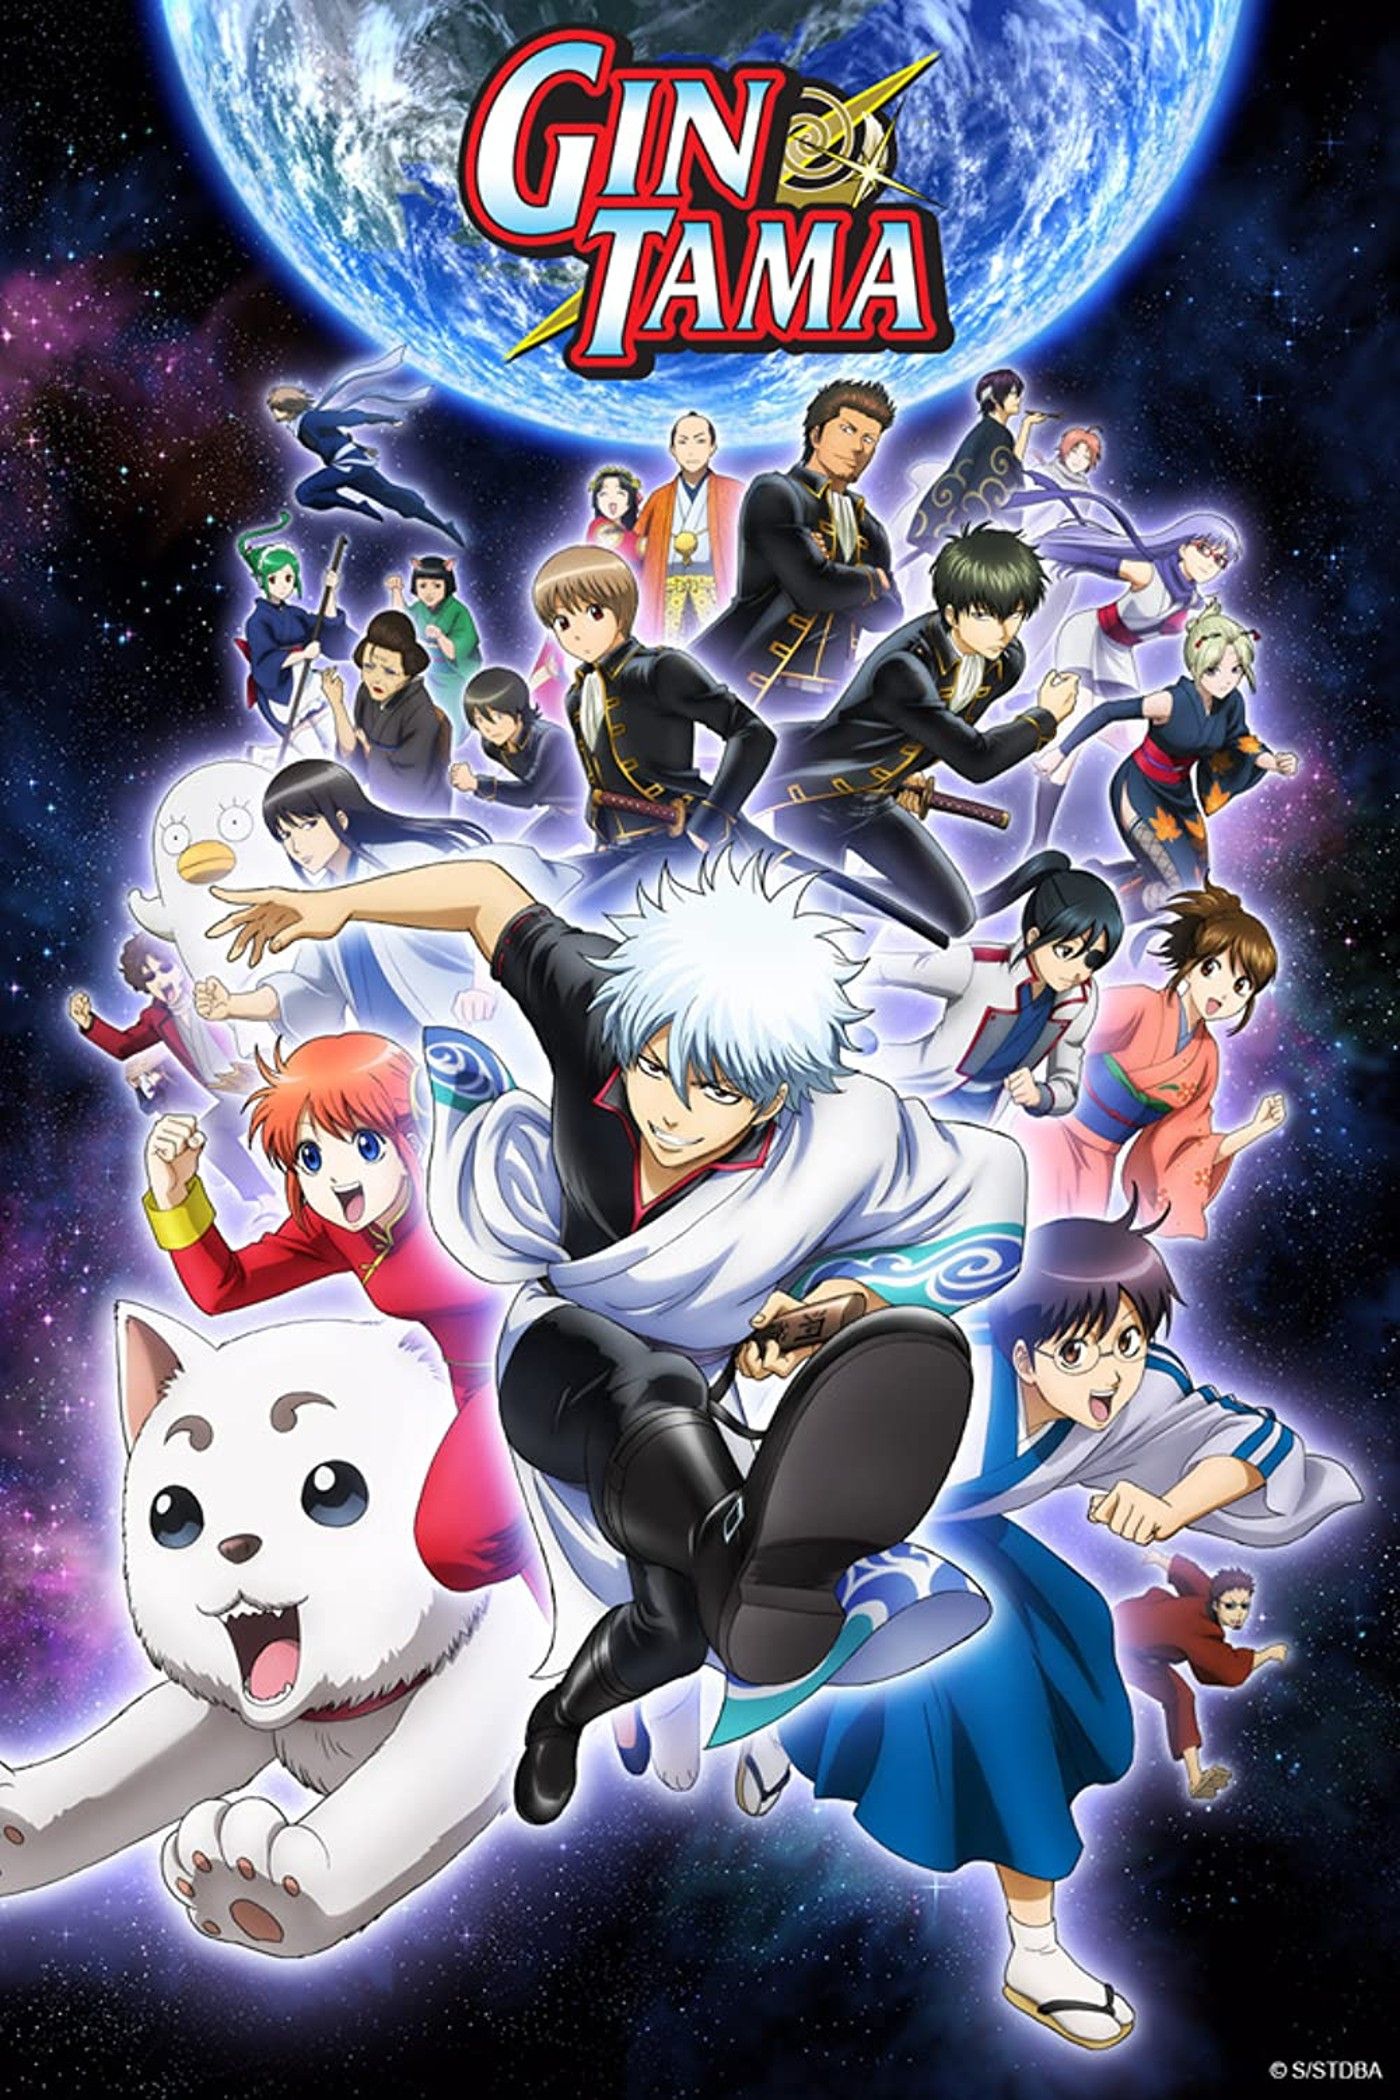 Gintama poster showing off the main cast